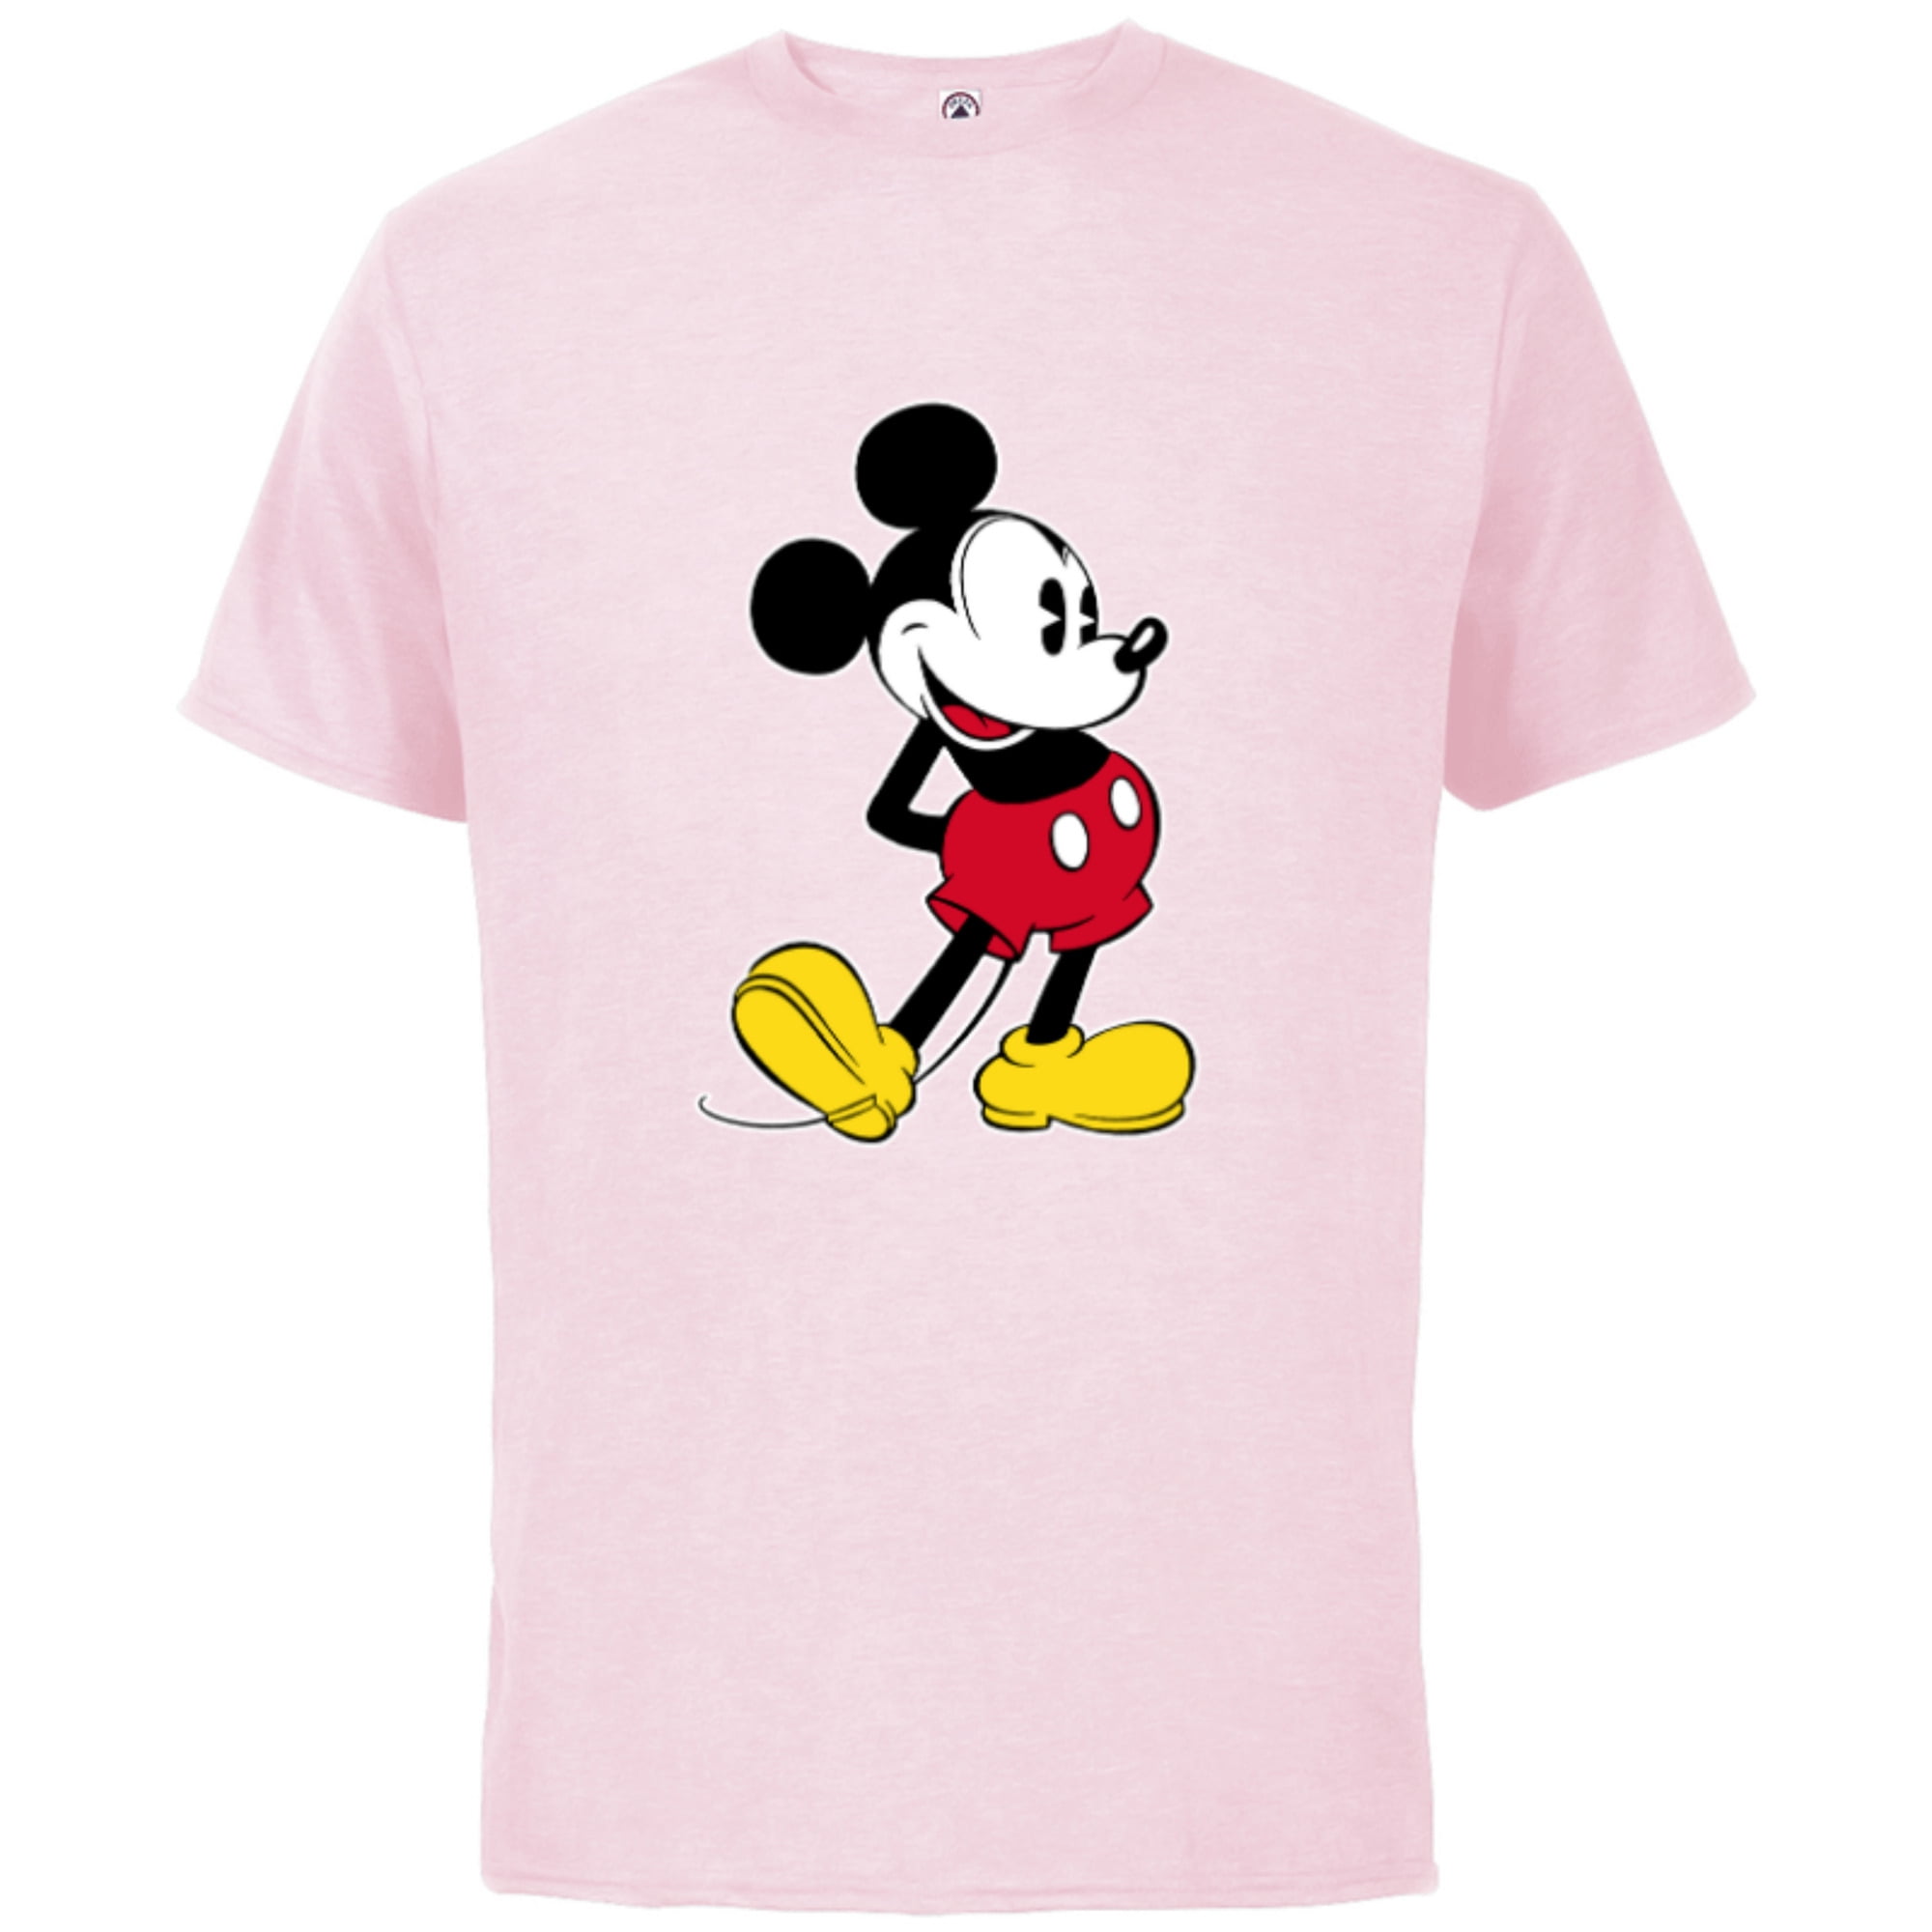 Disney Mickey Mouse Classic Pose - Short Sleeve Cotton T-Shirt for Adults-  Customized-Soft Pink